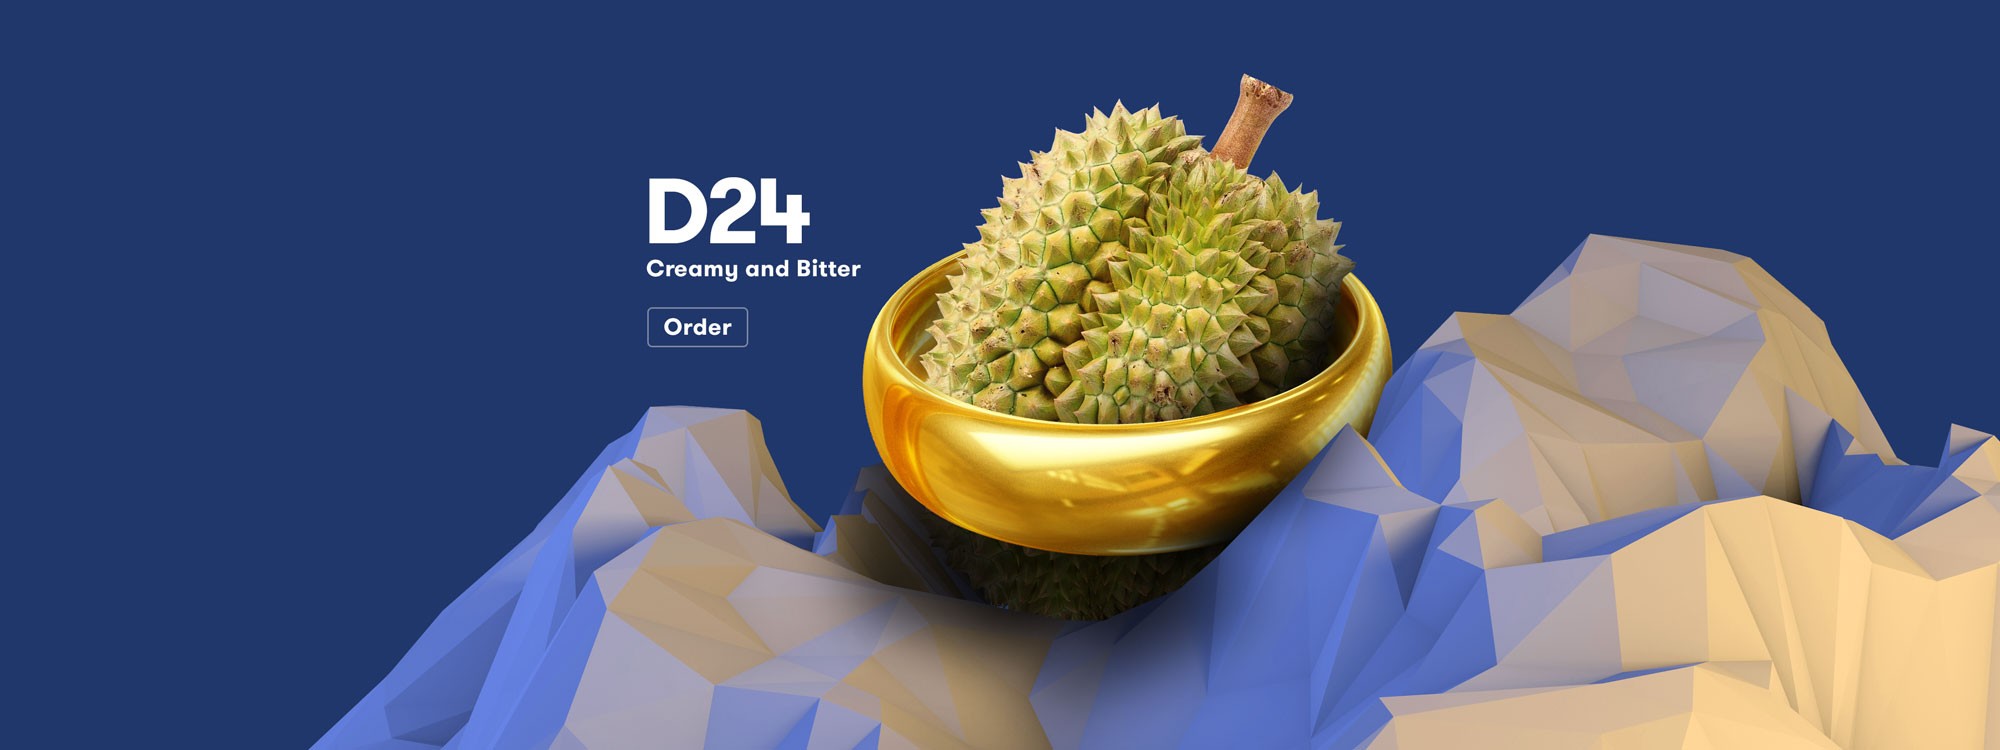 Durian Delivery D24